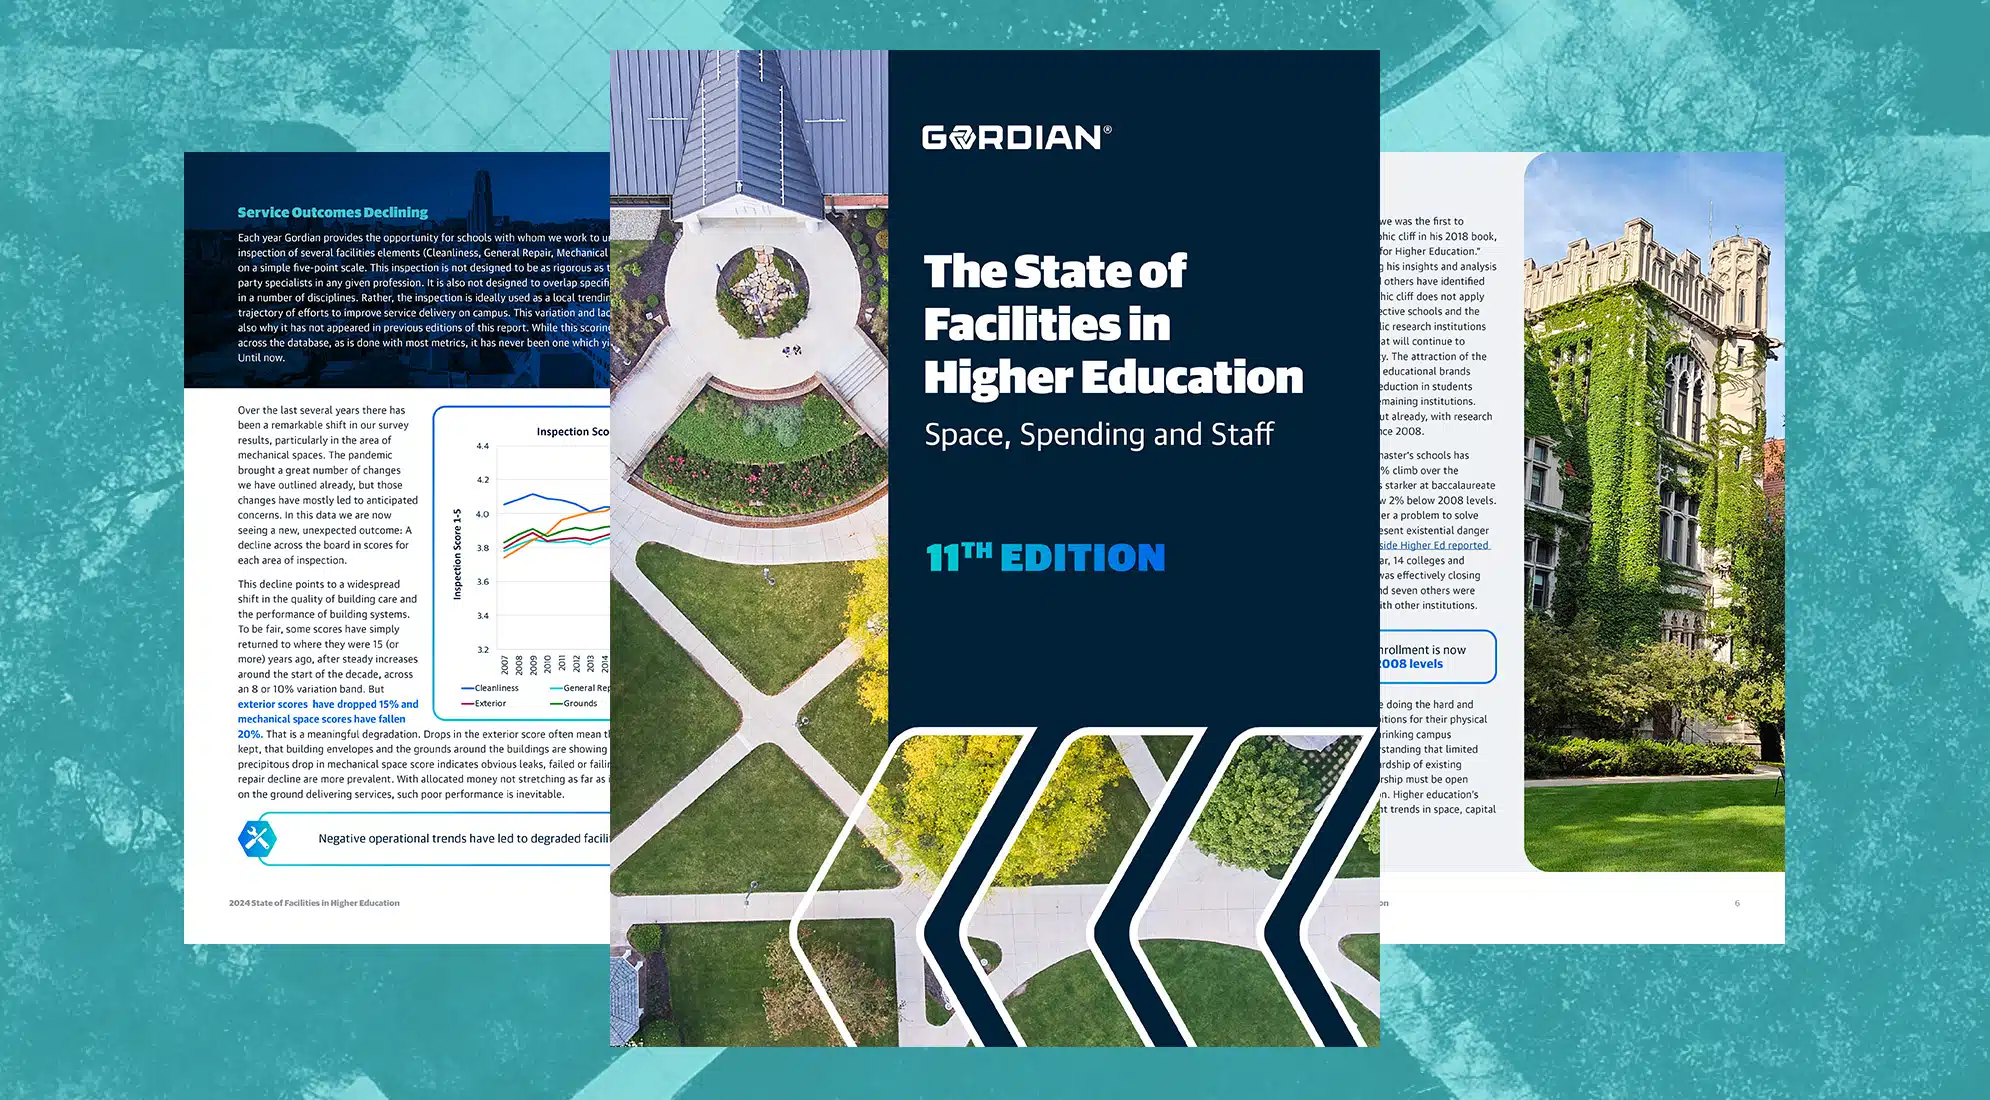 The State of Facilities in Higher Education, 11th Edition 2